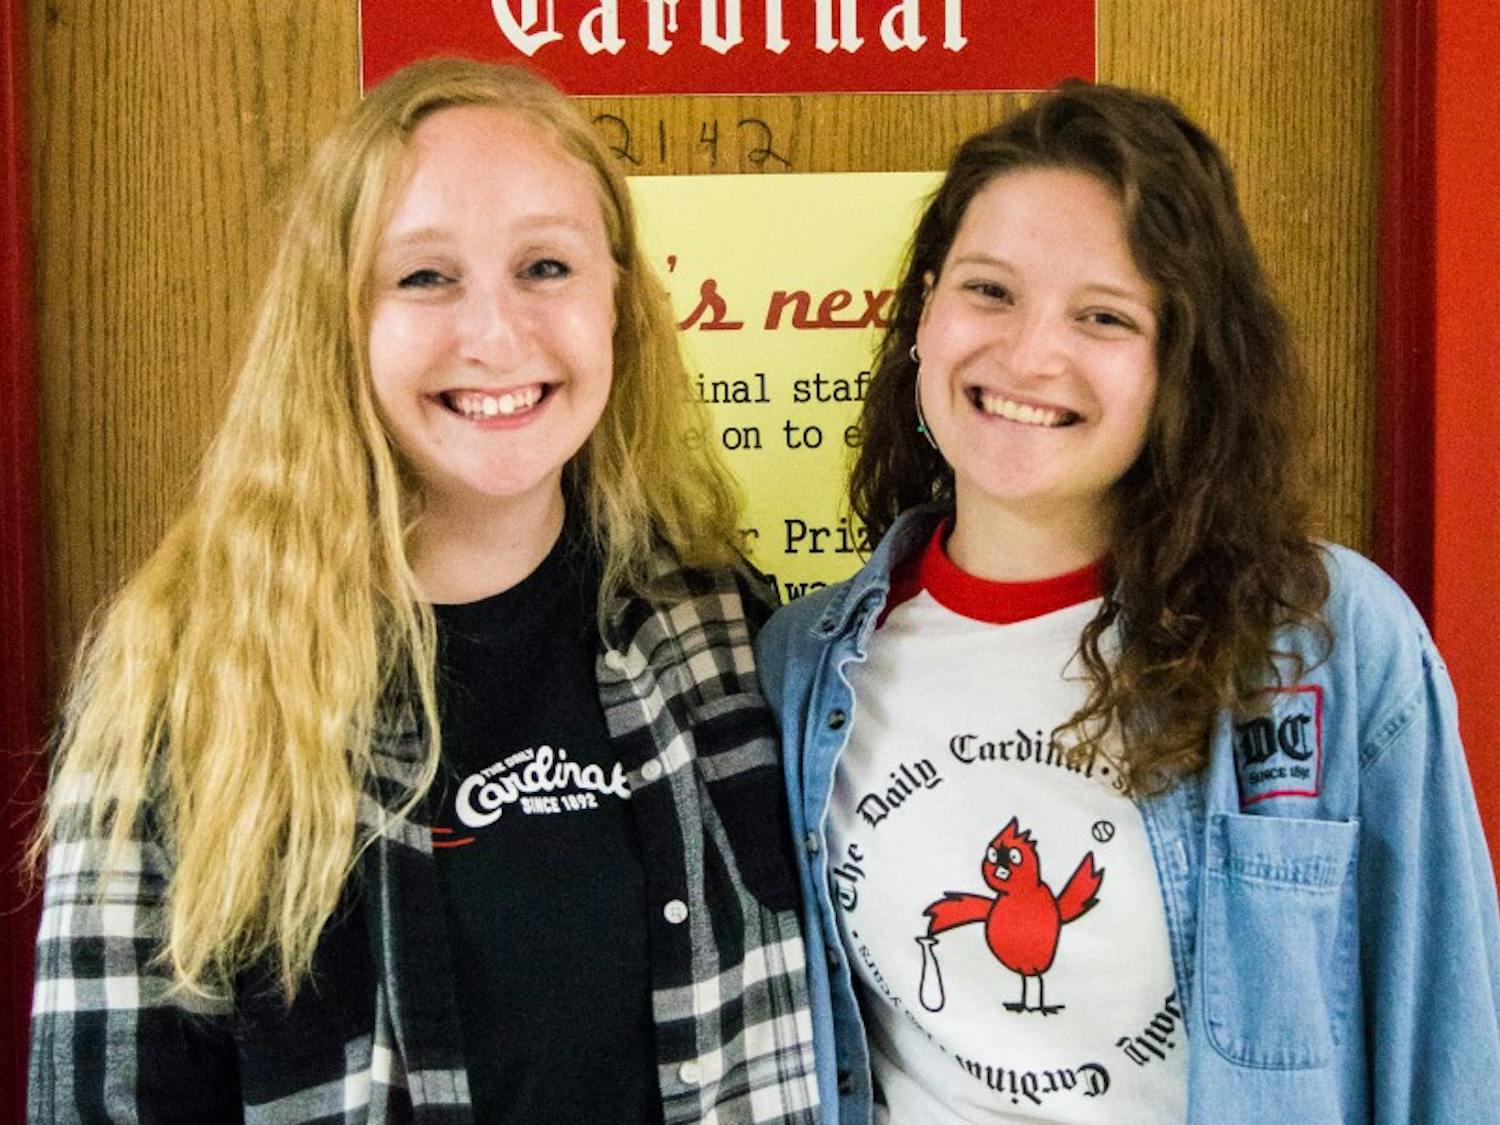 Madeline and Theda share their thoughts on the Cardinal.